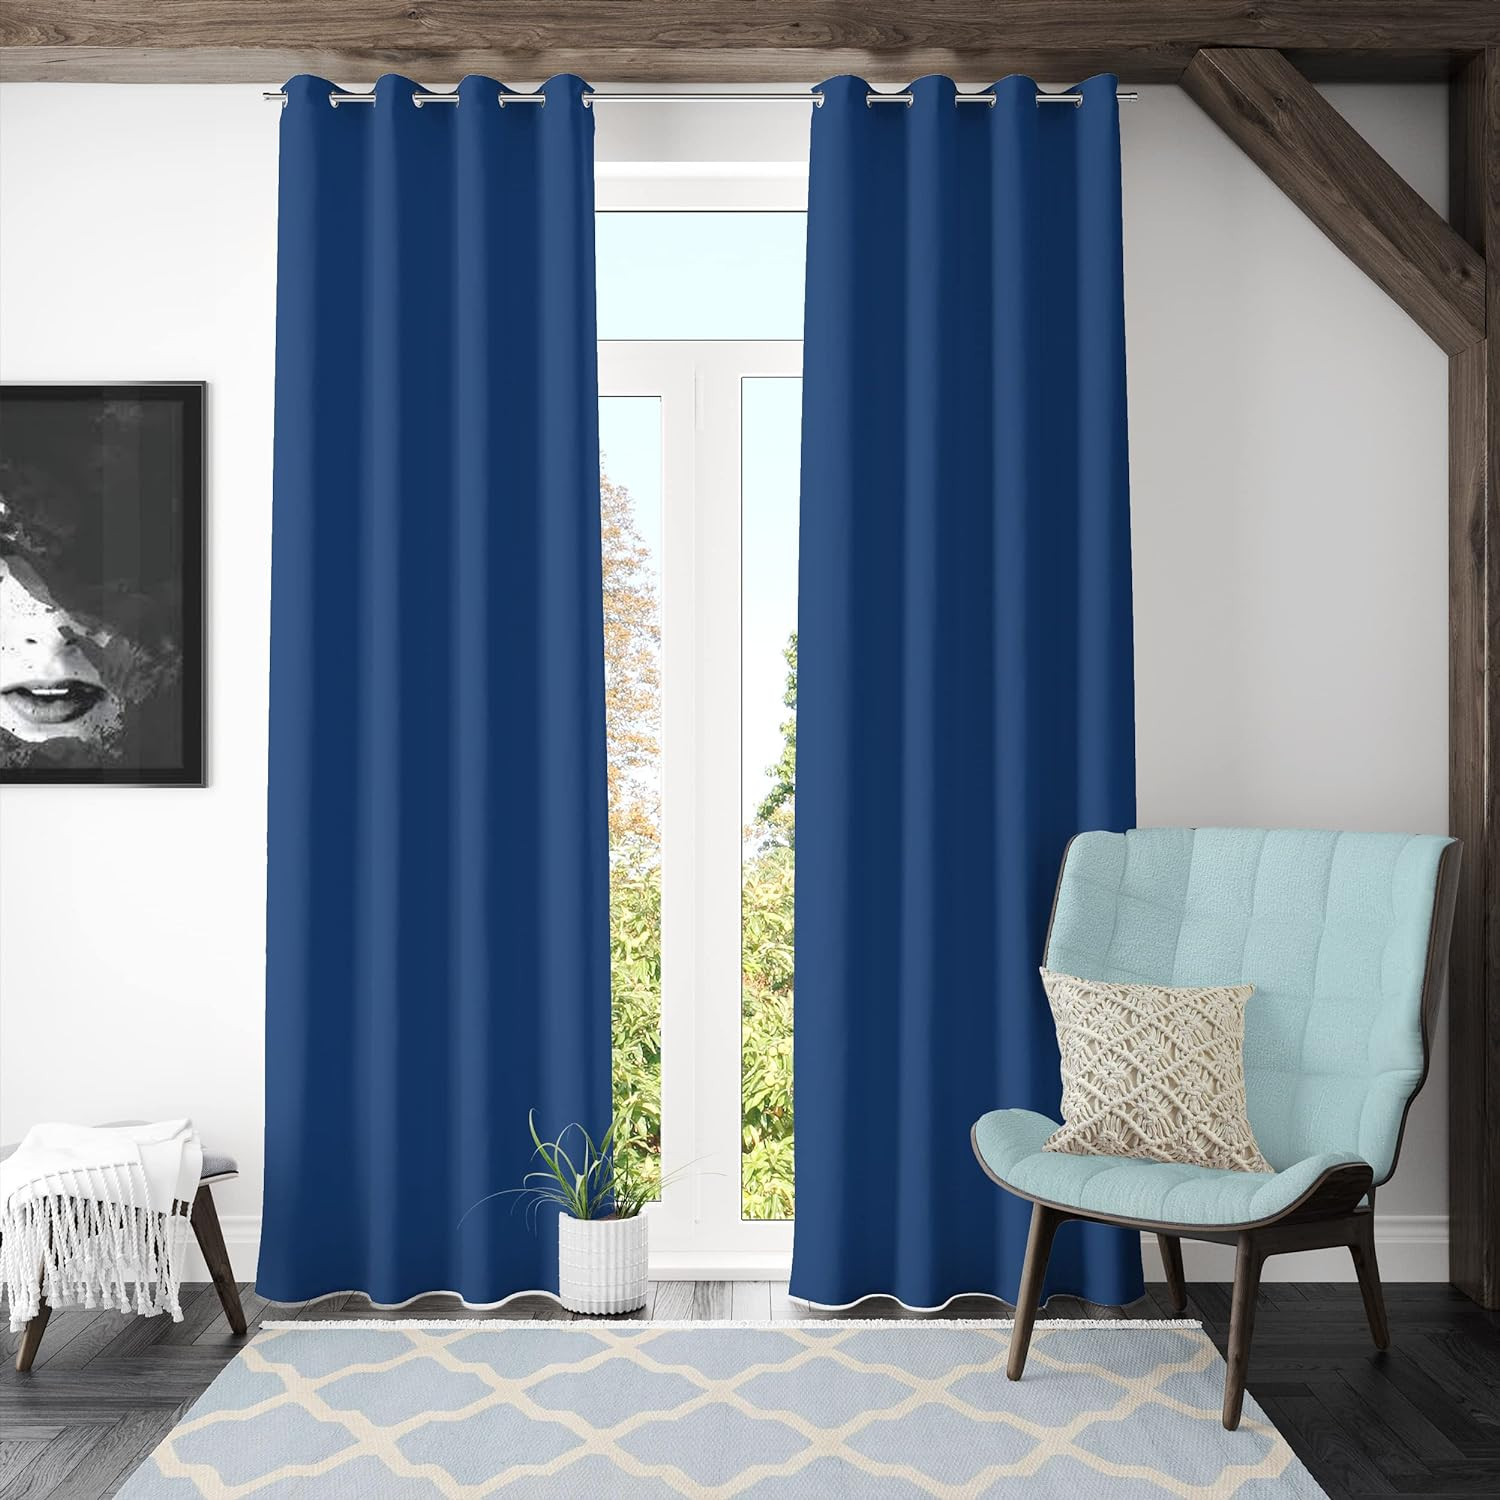 Kuber Industries 100% Room Darkening Black Out Curtain I 5 Feet Window Curtain I Insulated Heavy Polyester Solid Curtain|Drapes with 8 Eyelet for Home & Office (Blue)